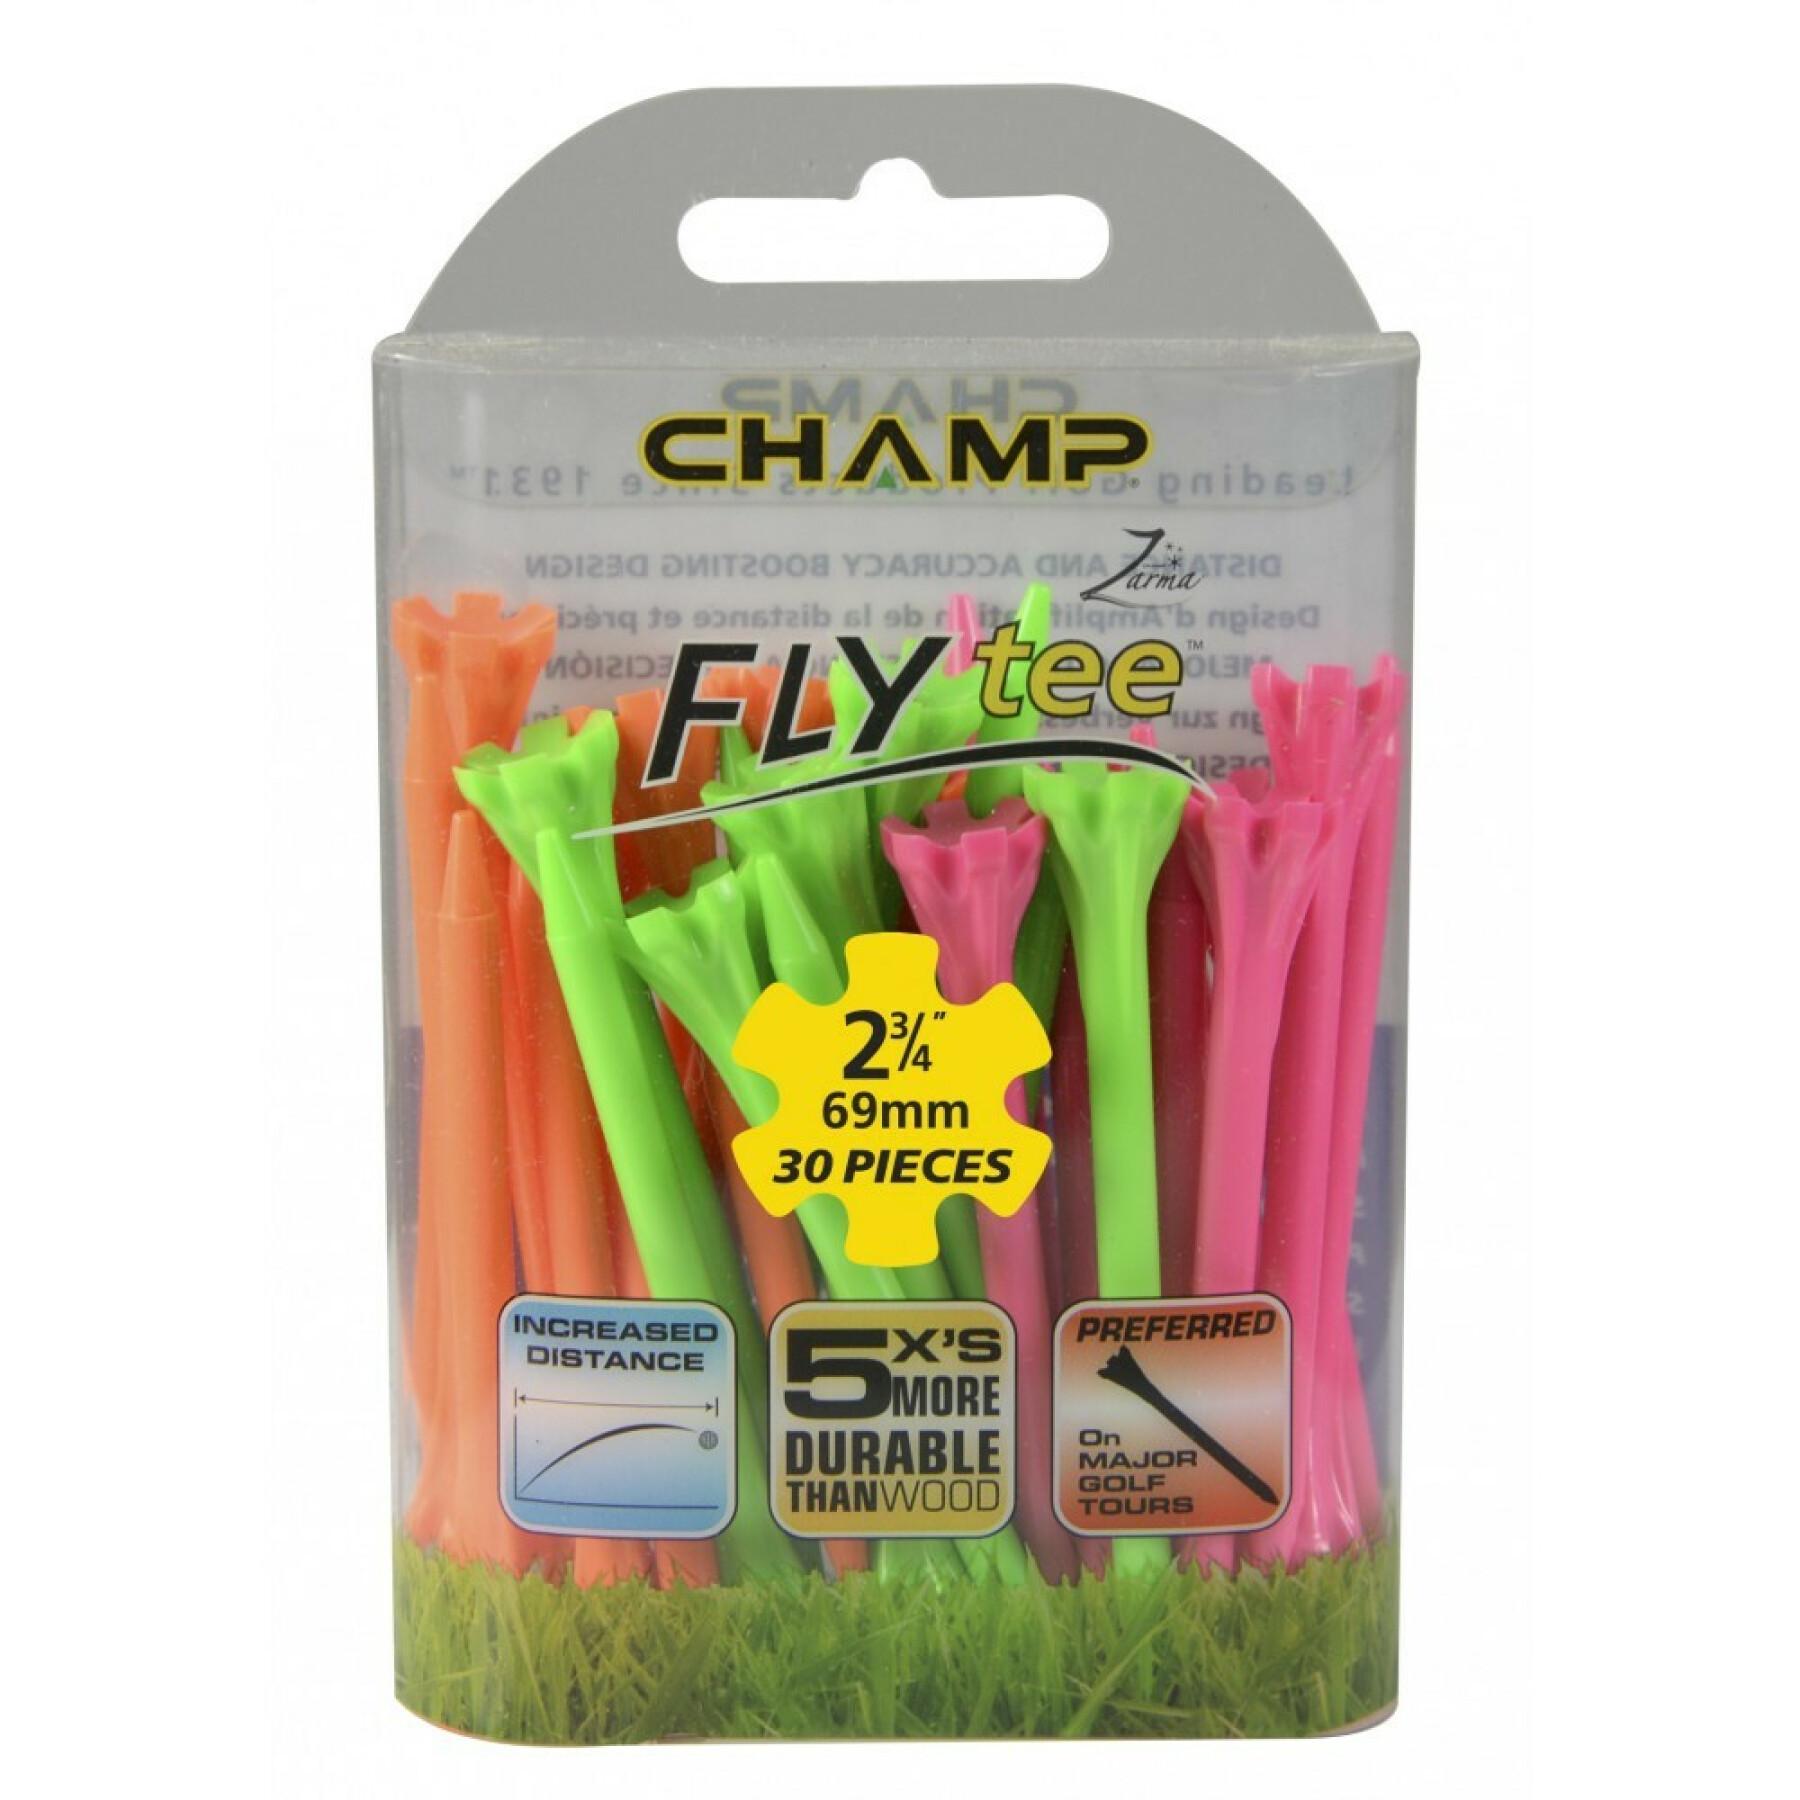 Bag of 30 tees 69 mm Champ Fly